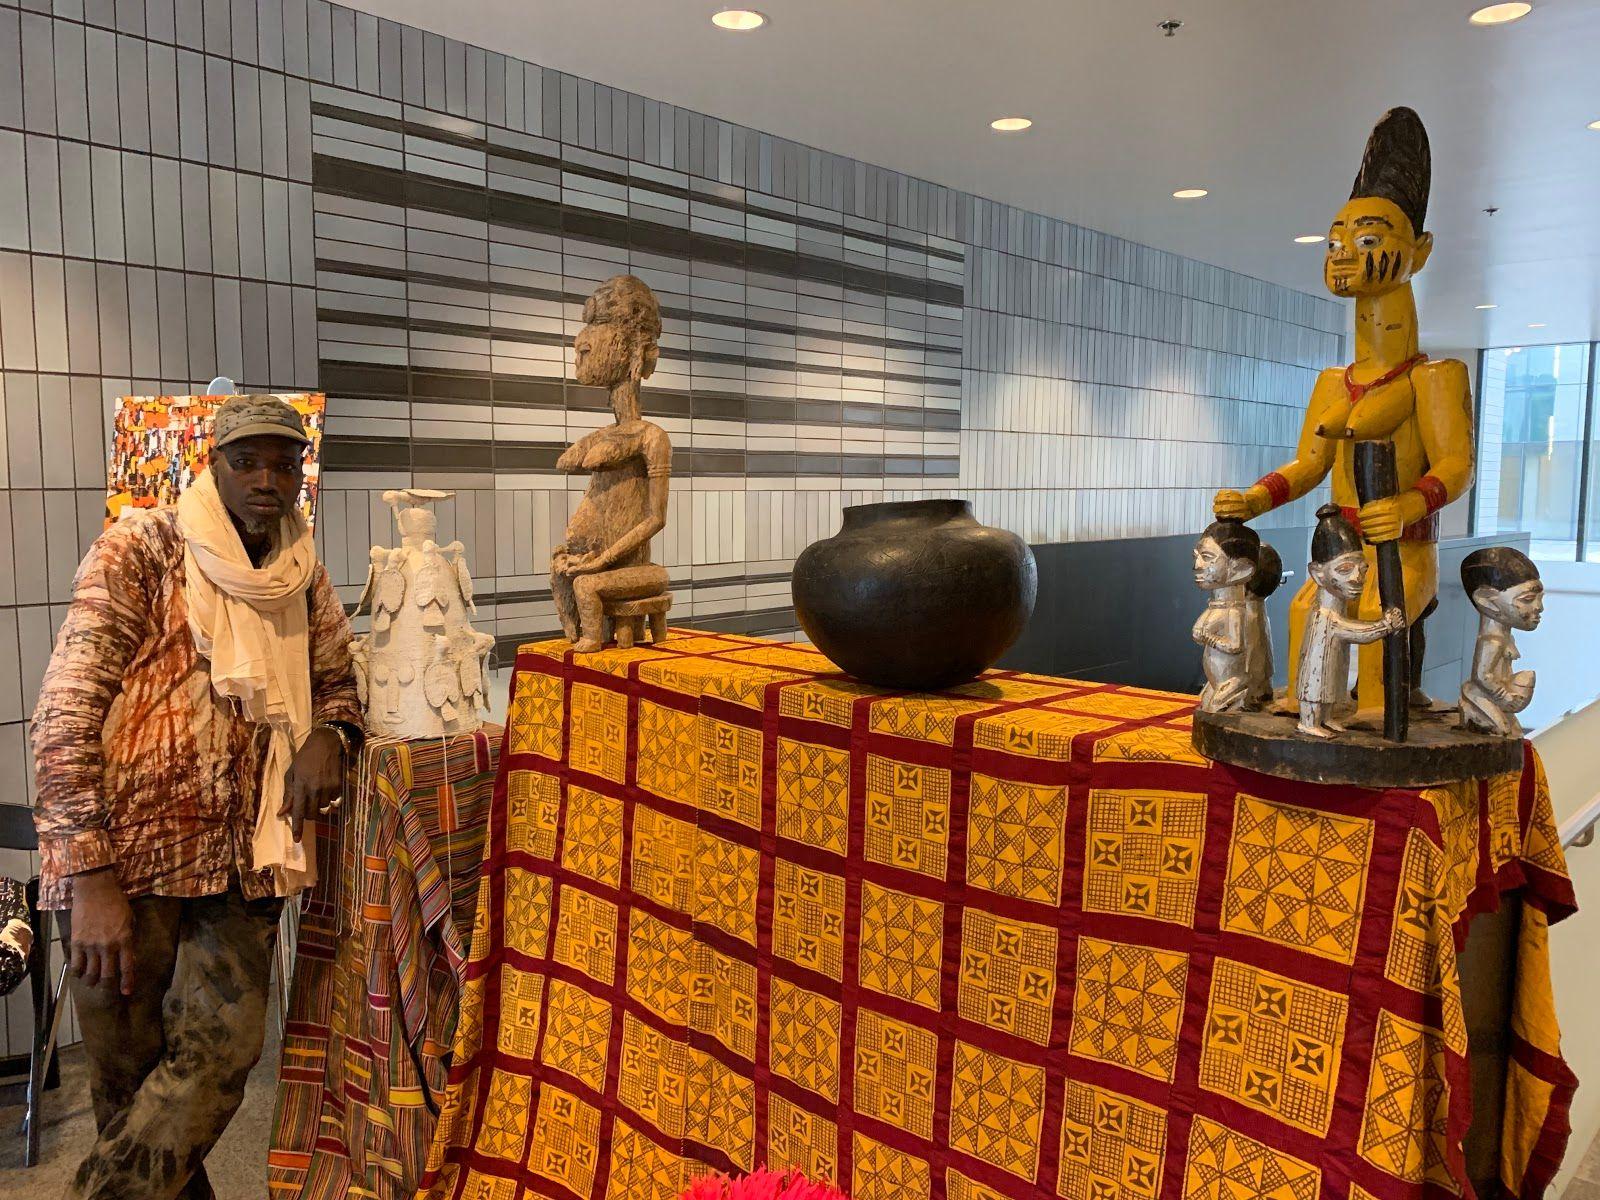 Diarra Diaby stands next to collected pieces. From left: a ceremonial Yoruba crown, “Mother and Son” statue, South African cooking pot and “Queen Mother” statue. (Angel Idowu / WTTW News)